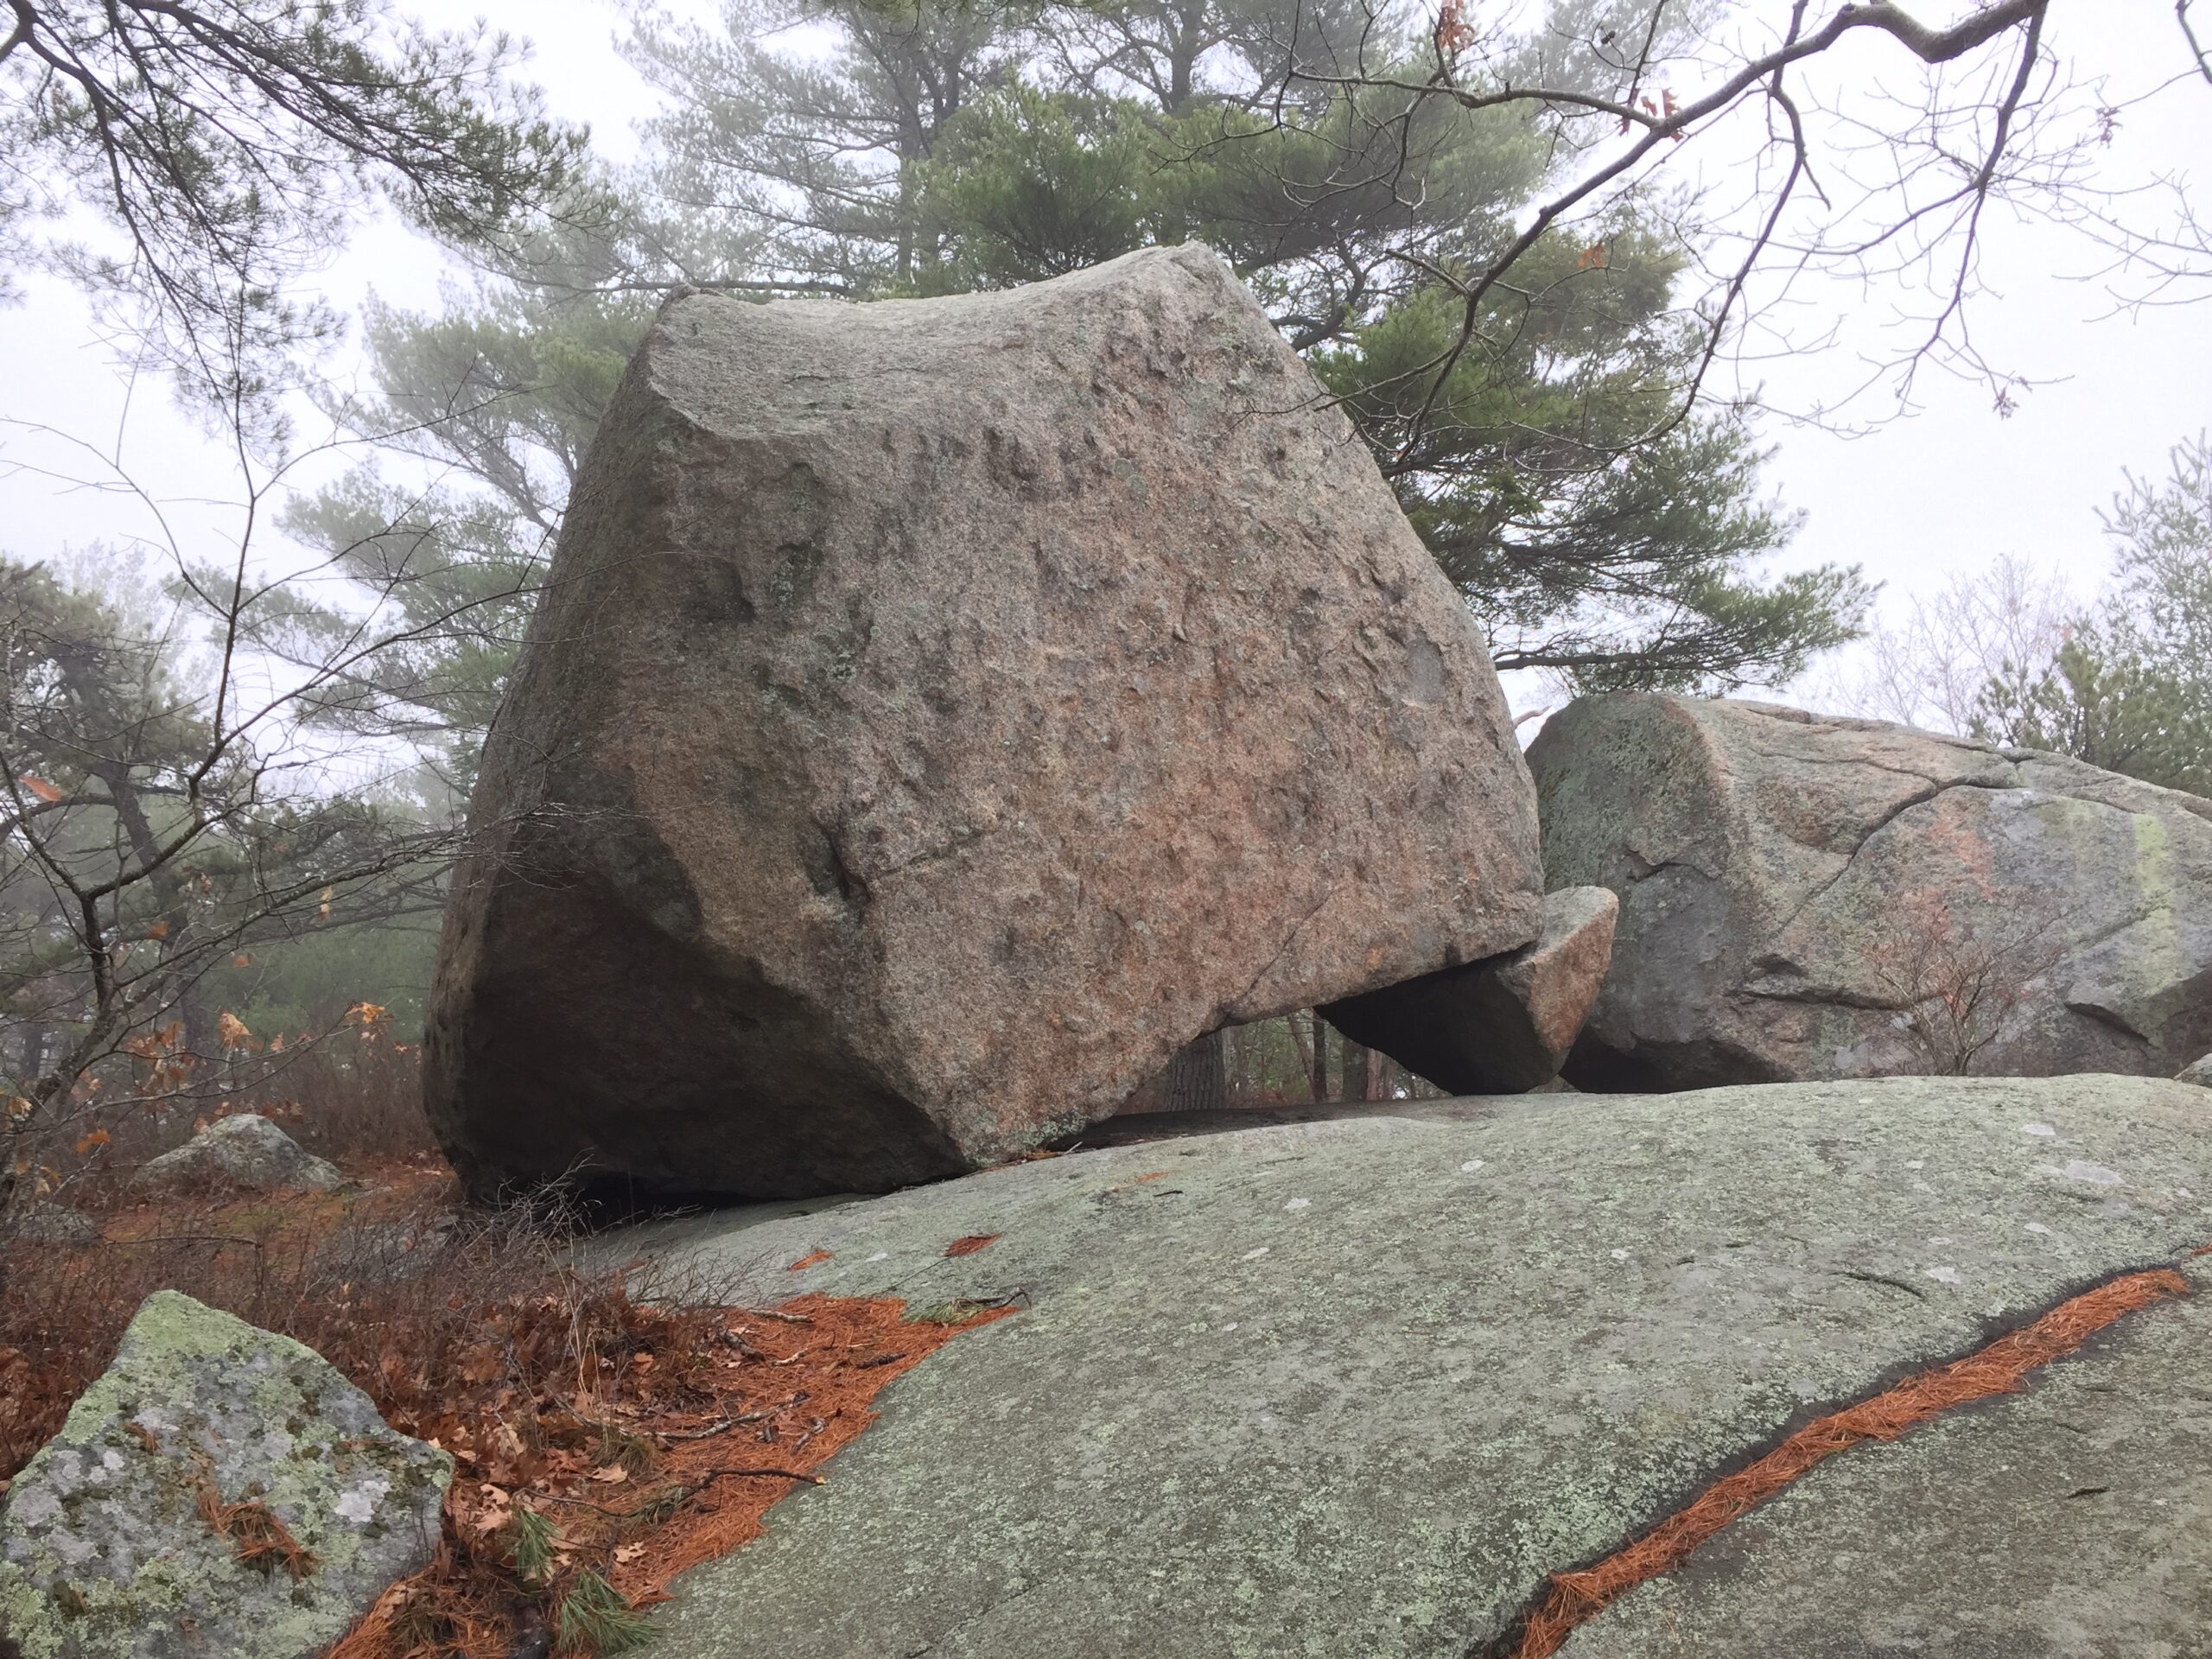 Large balanced boulders outdoors at the Monoliths